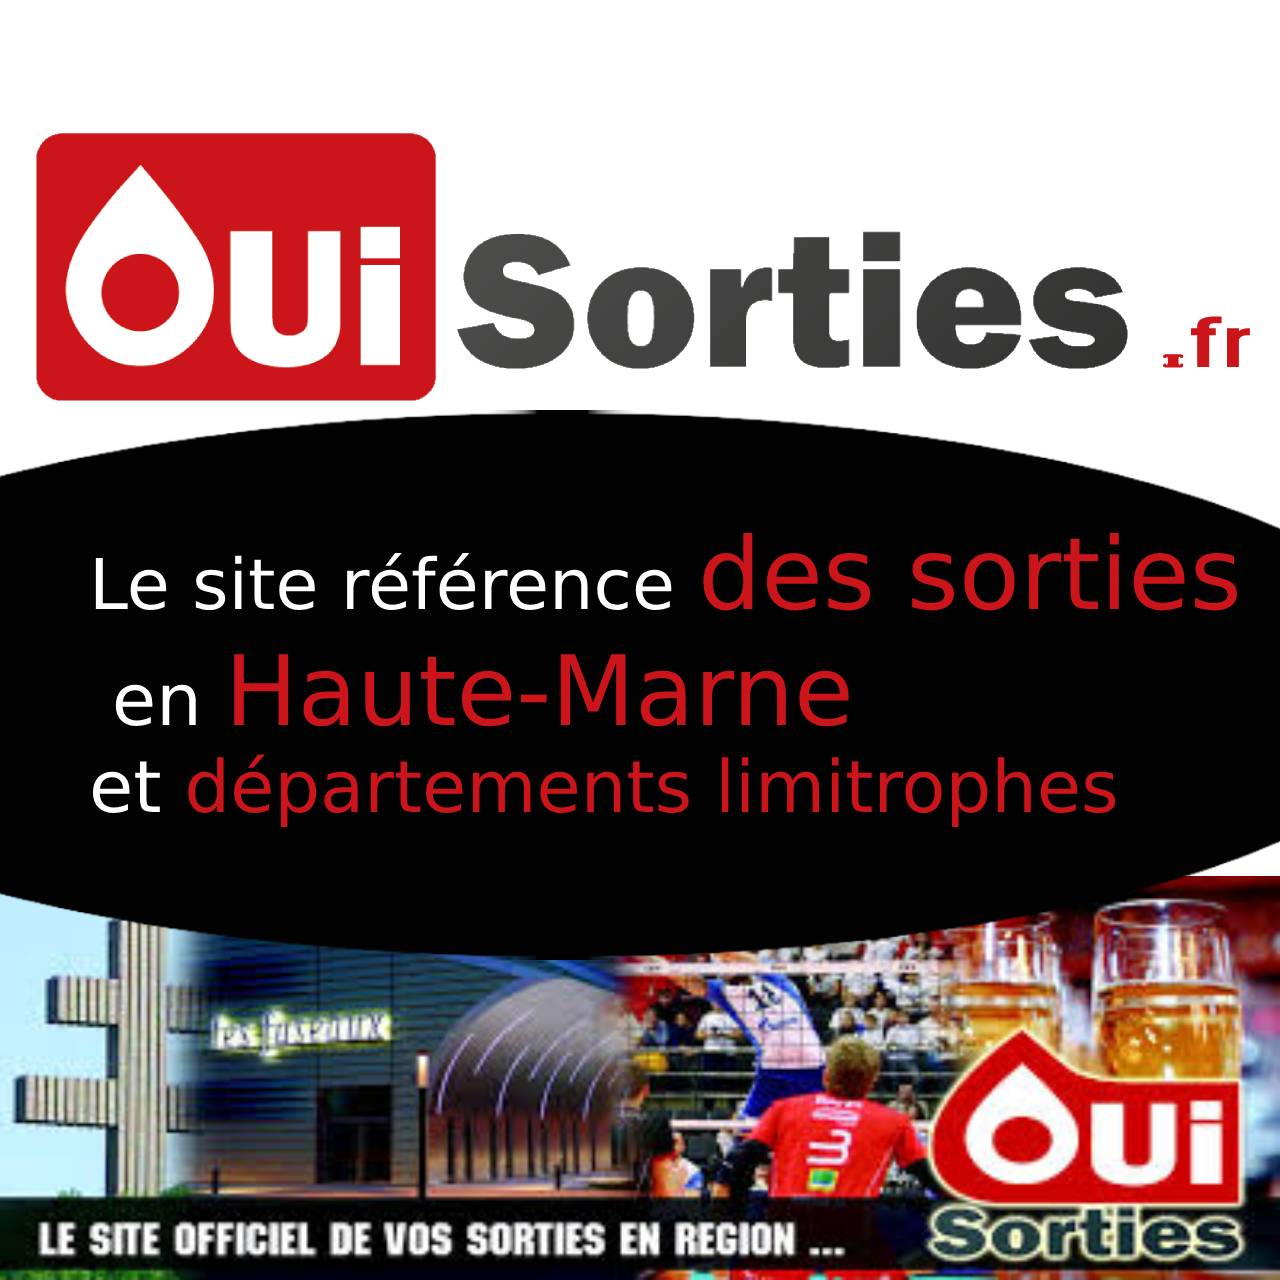 ouisorties.fr